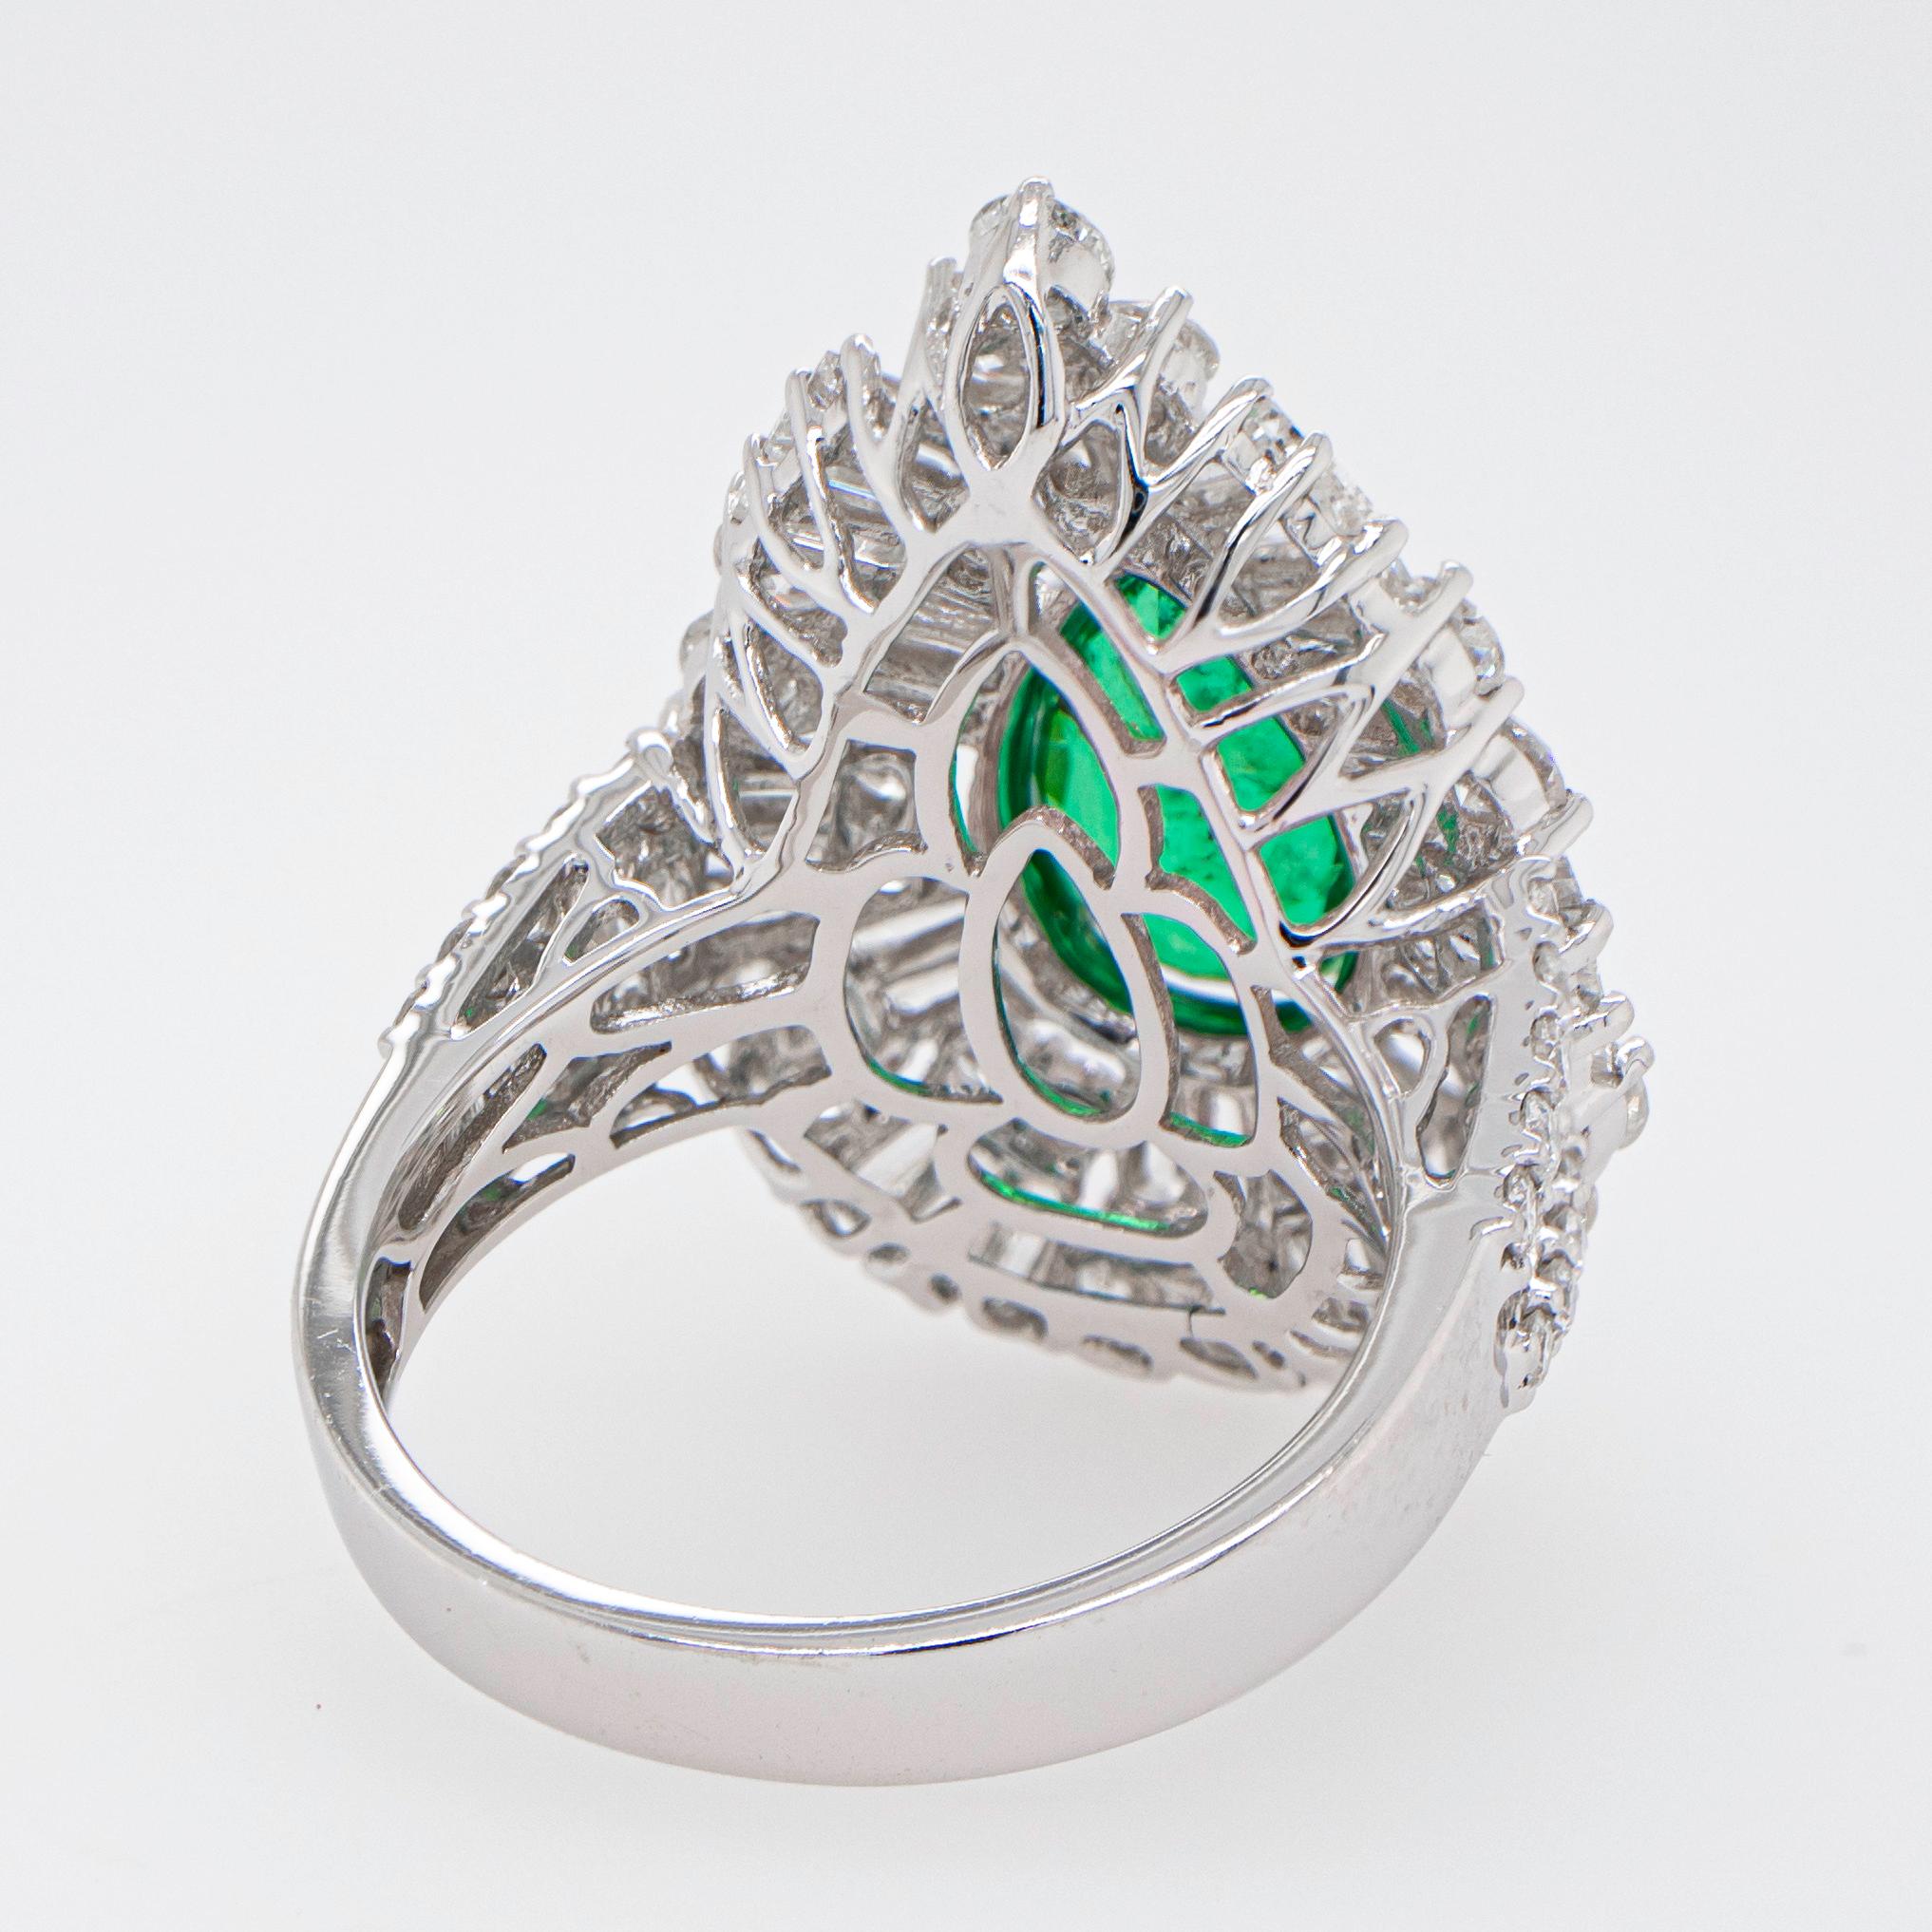 Contemporary Important Pear Shaped Emerald Ring 2.25 Carat Set in Diamond Setting 3.45 Carats